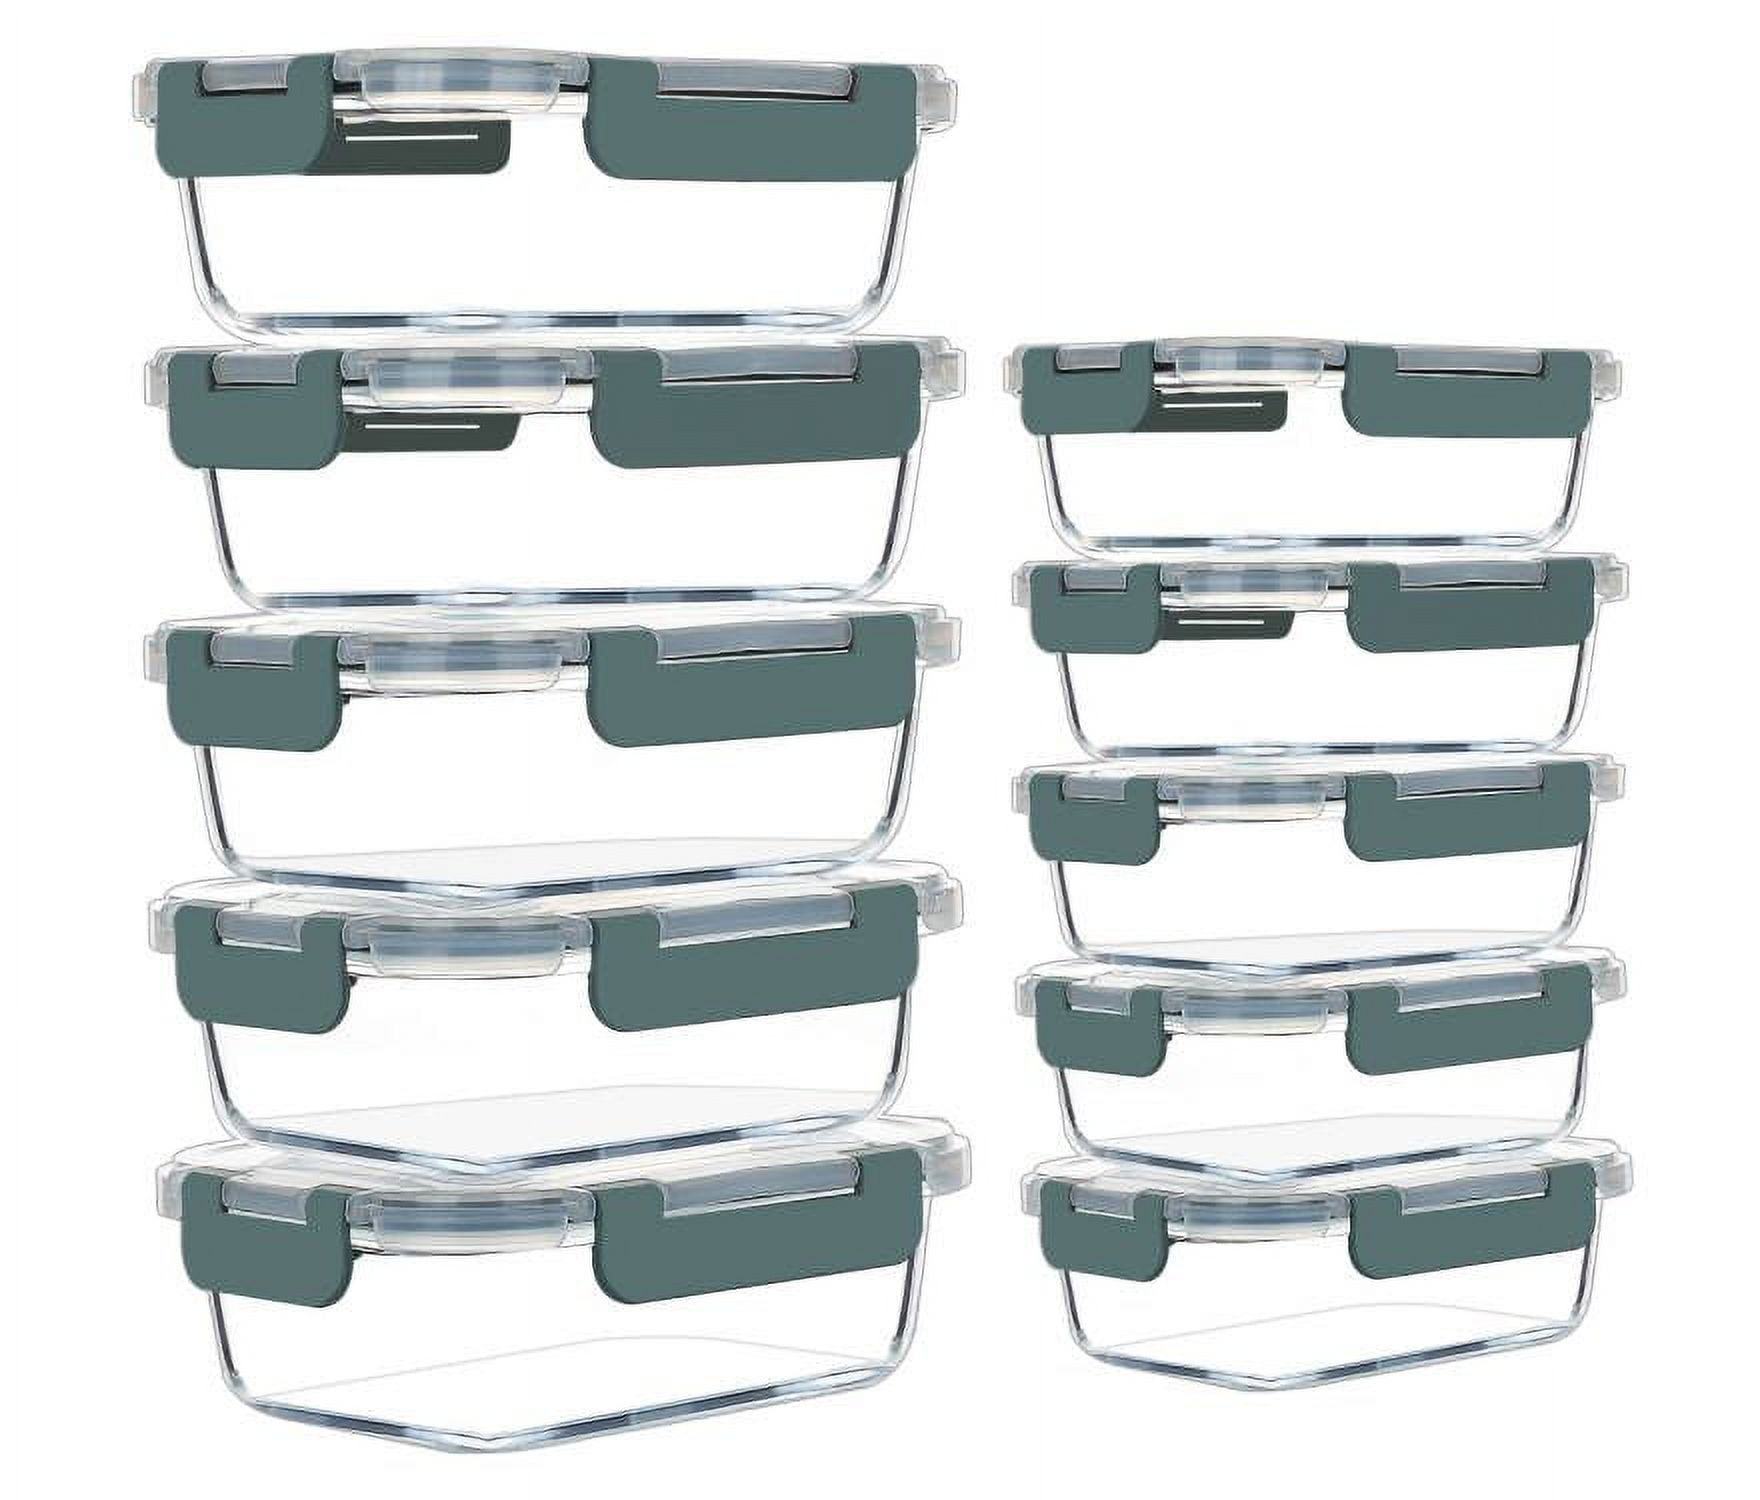 HAKEEMI Glass Meal Prep Containers 10 Pack, Glass Food Storage Containers  with Snap Locking Lids Airtight Built in Air Vents, Glass Containers for